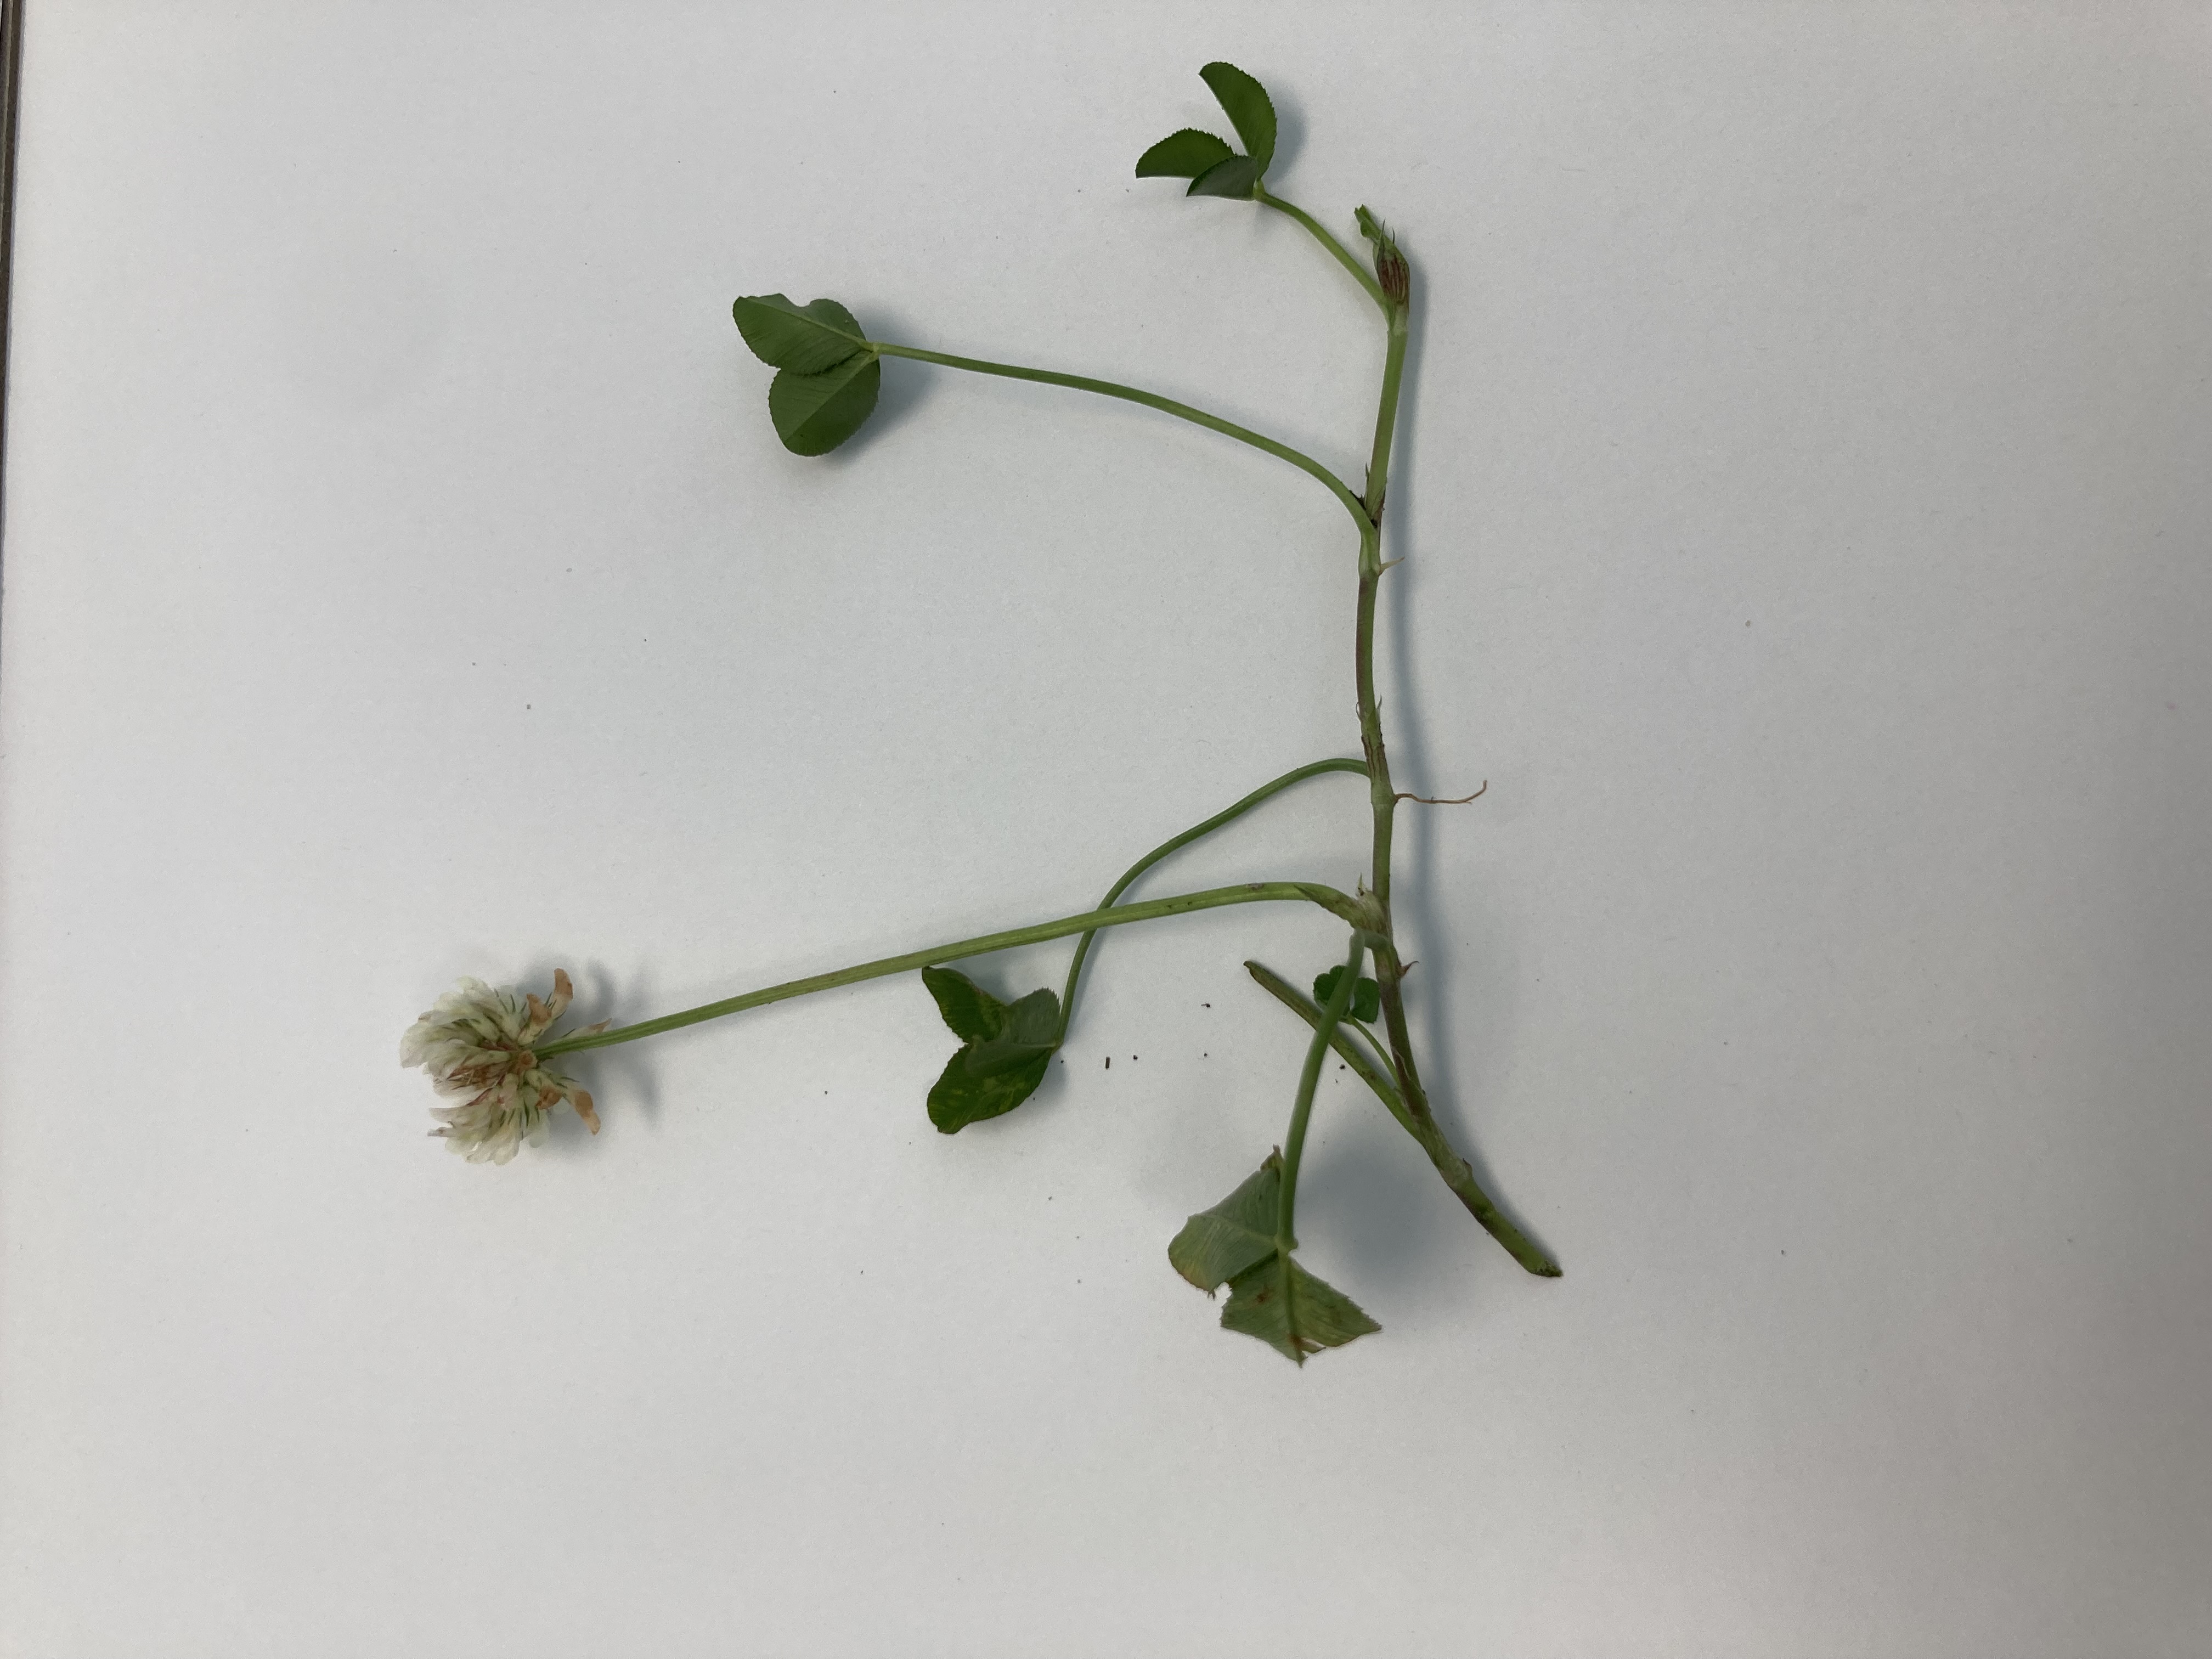 White clover stem with leaves and flower.